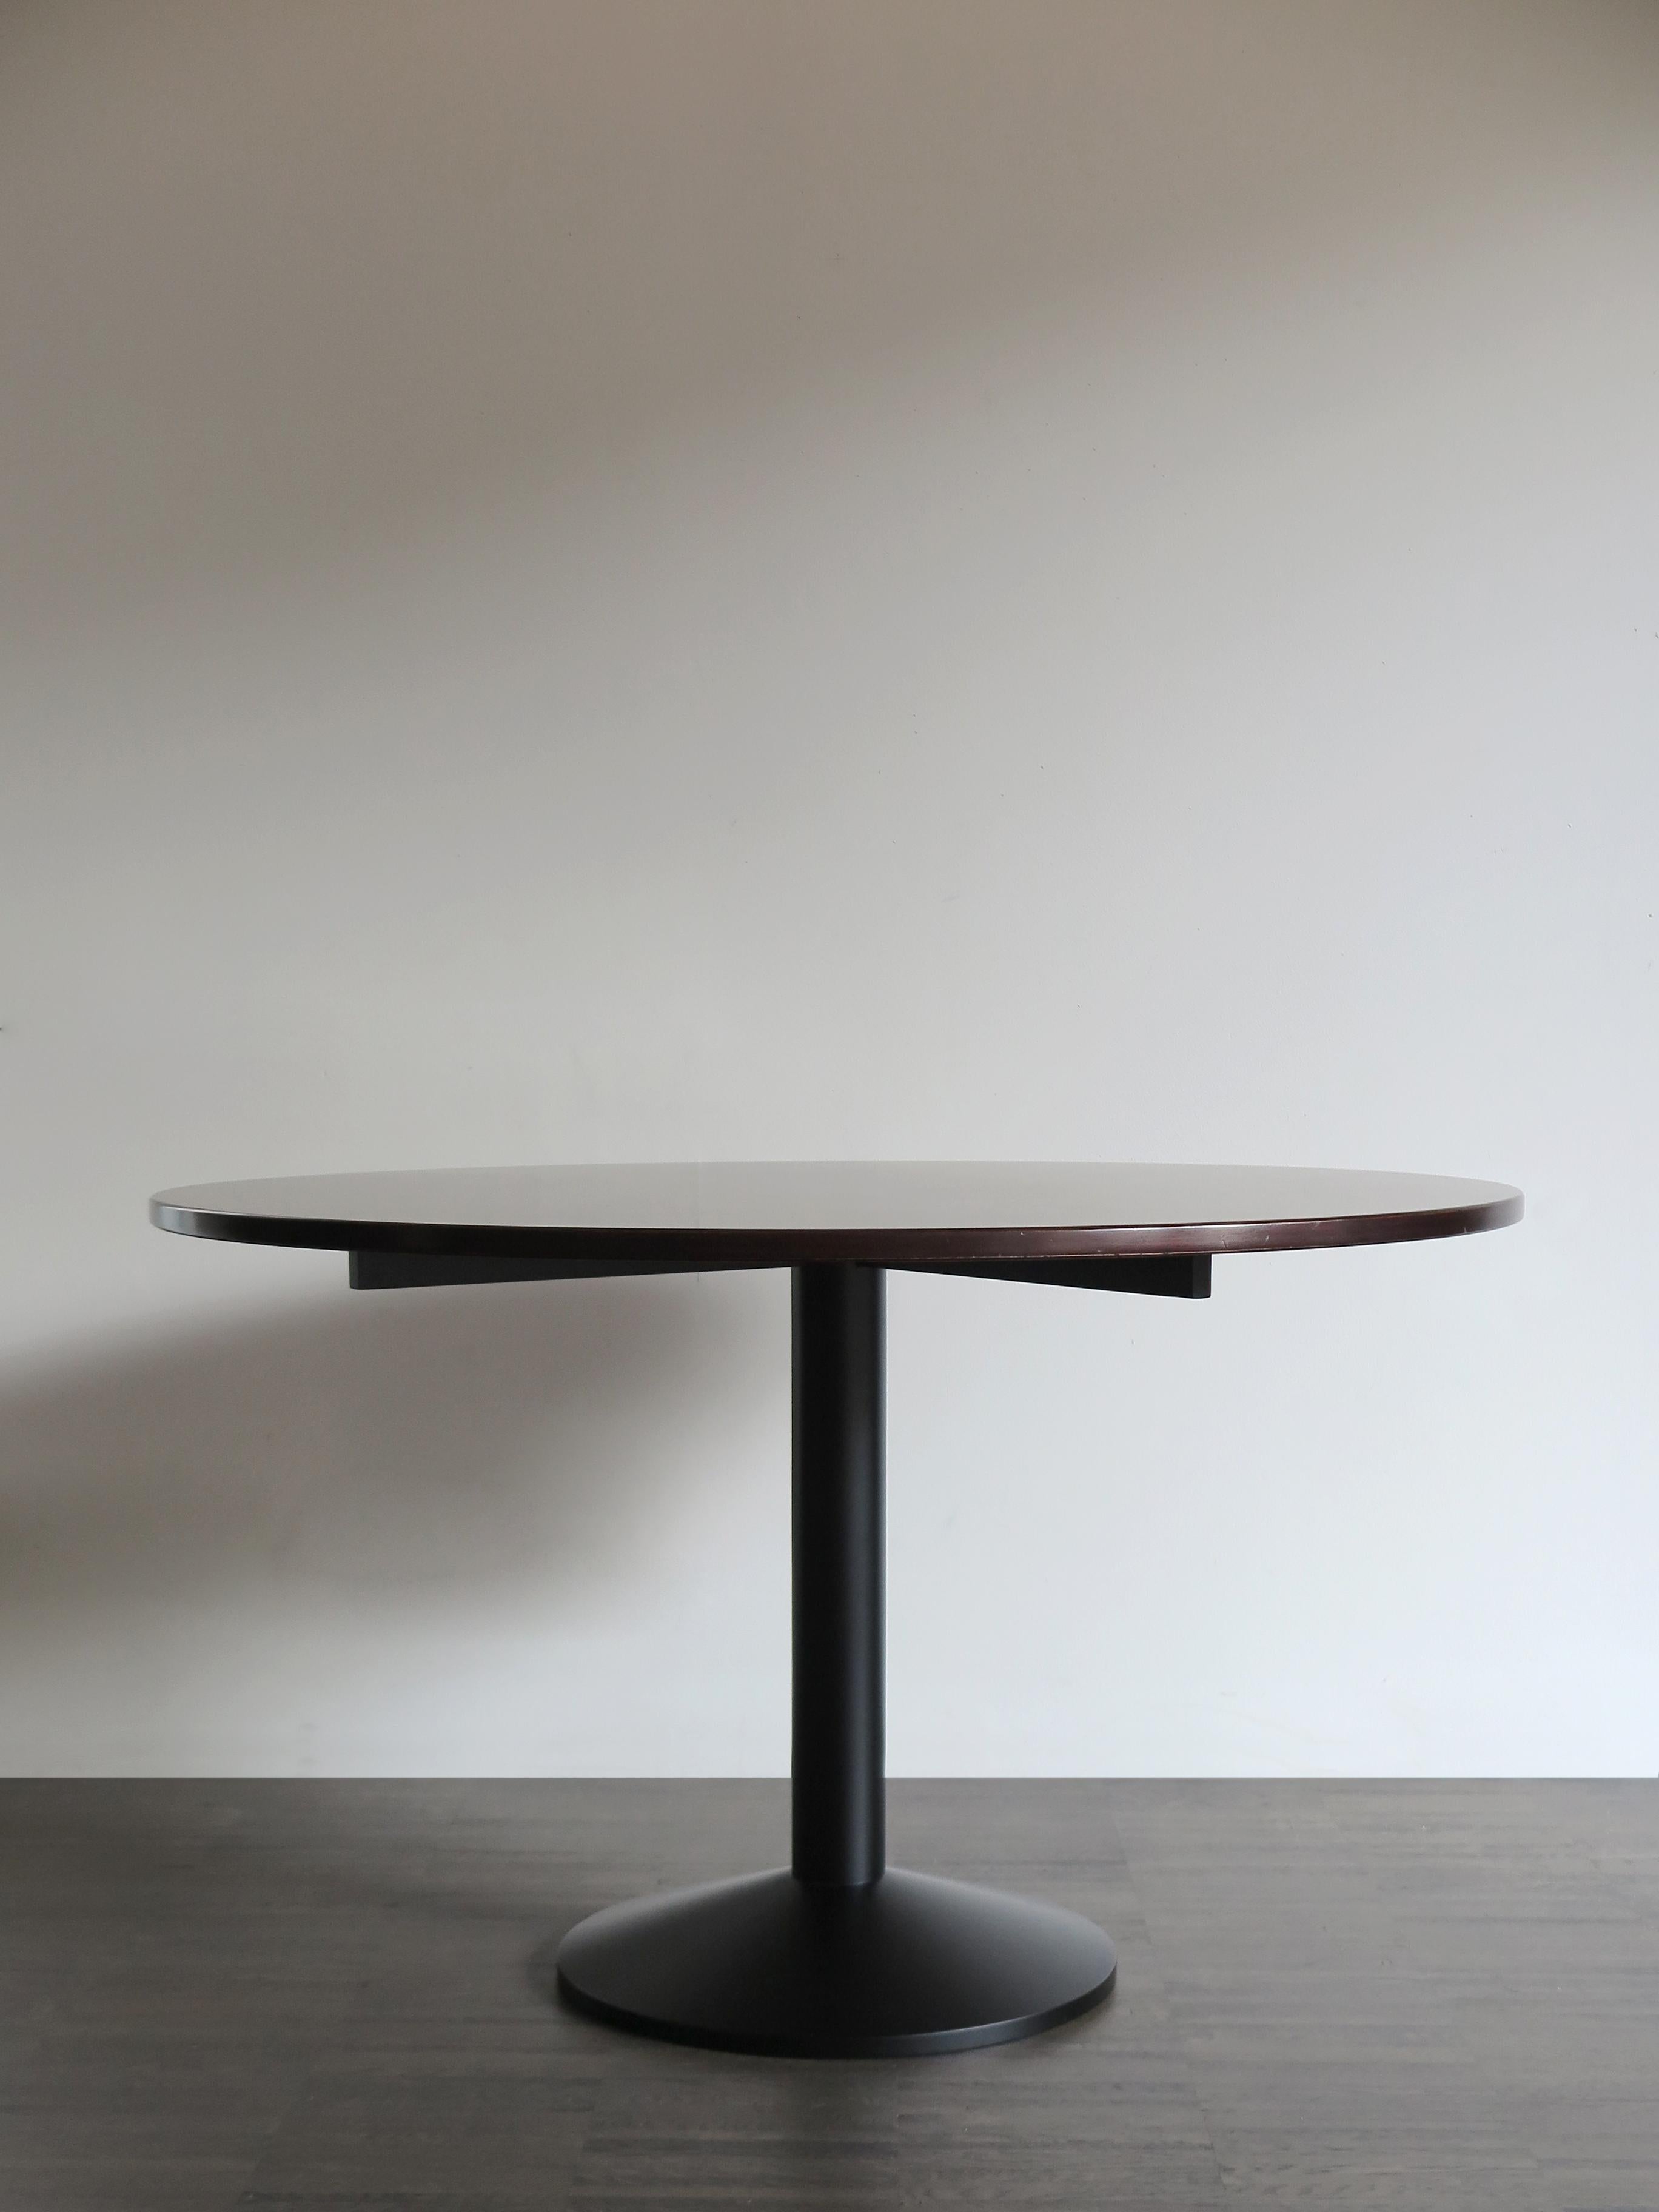 Italian Mid-Century Modern design round dining table designed by Franco Albini and produced by Poggi Pavia with structure and base in lacquered metal and dark wood top, 1950s
Very excellent vintage condition

Bibliography: Giuliana Gramigna,